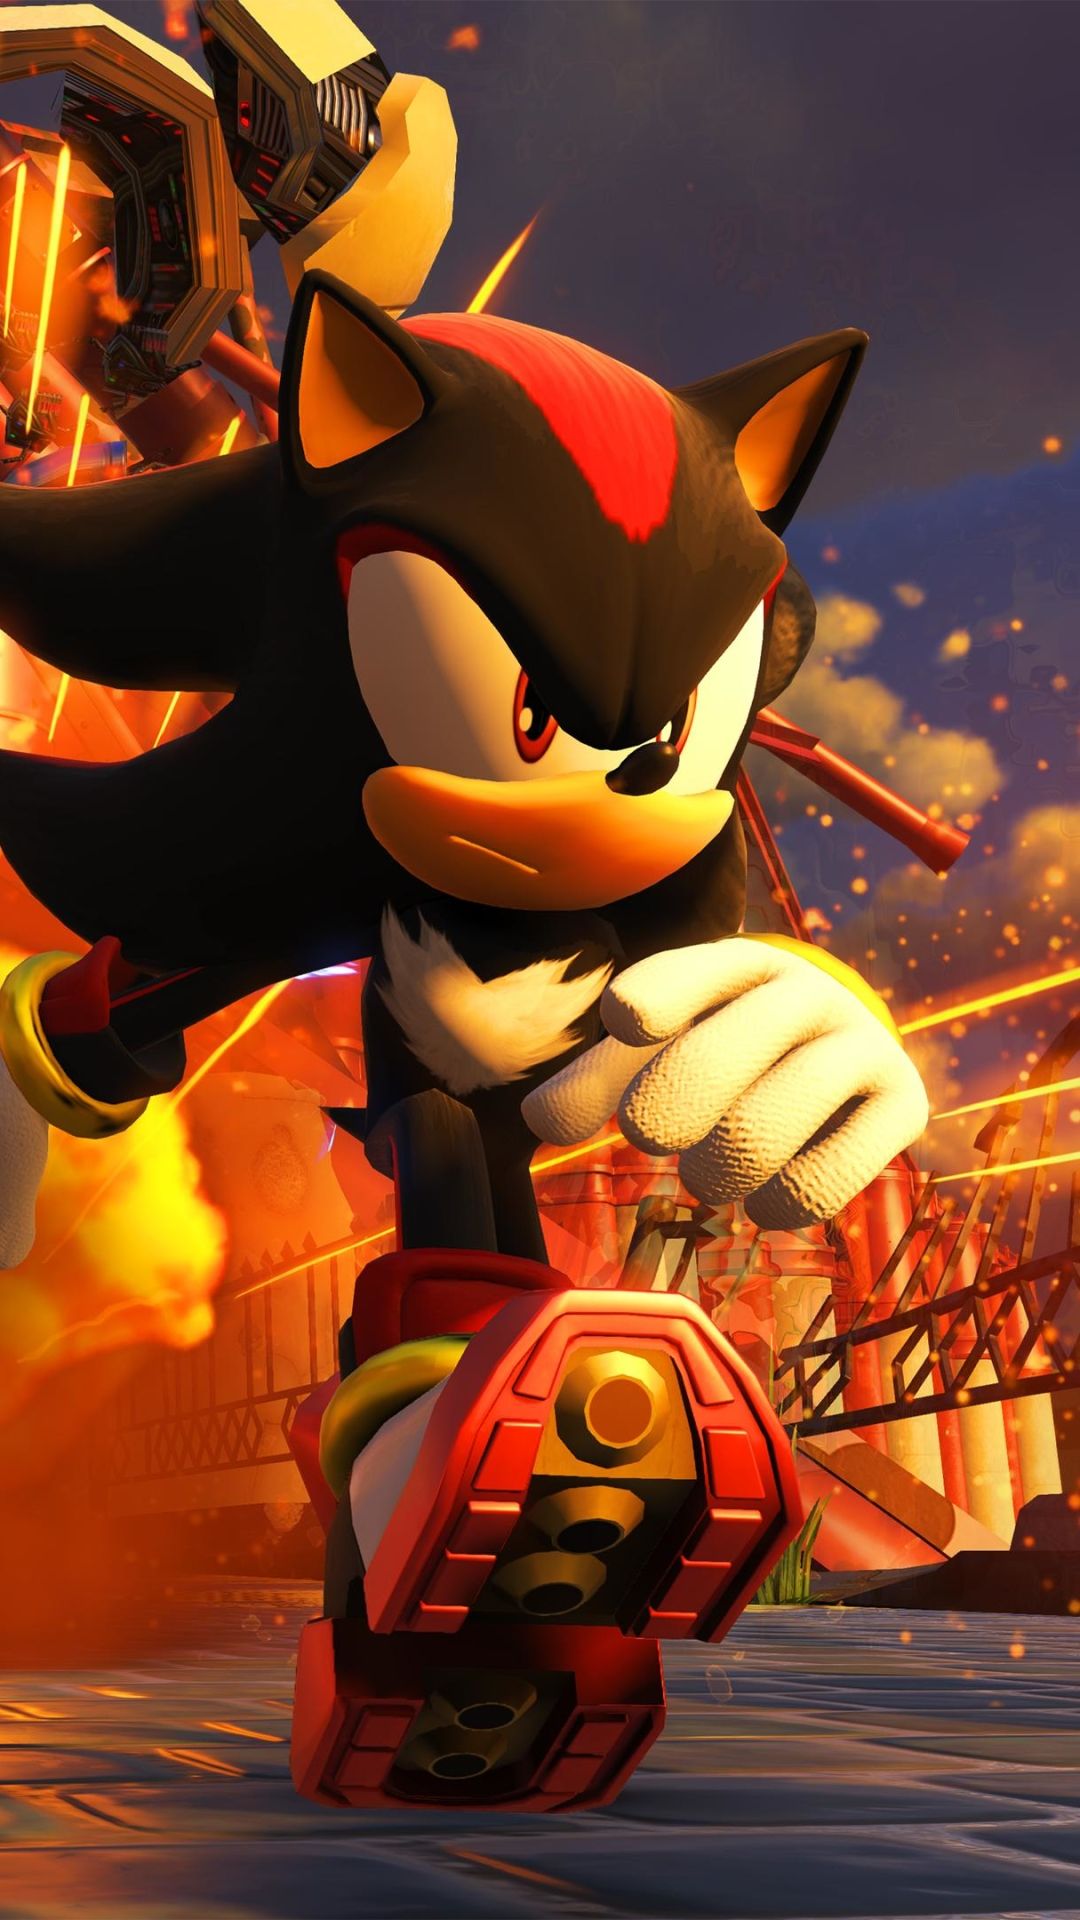 Shadow the Hedgehog wallpaper for iPhone and Android - Sonic